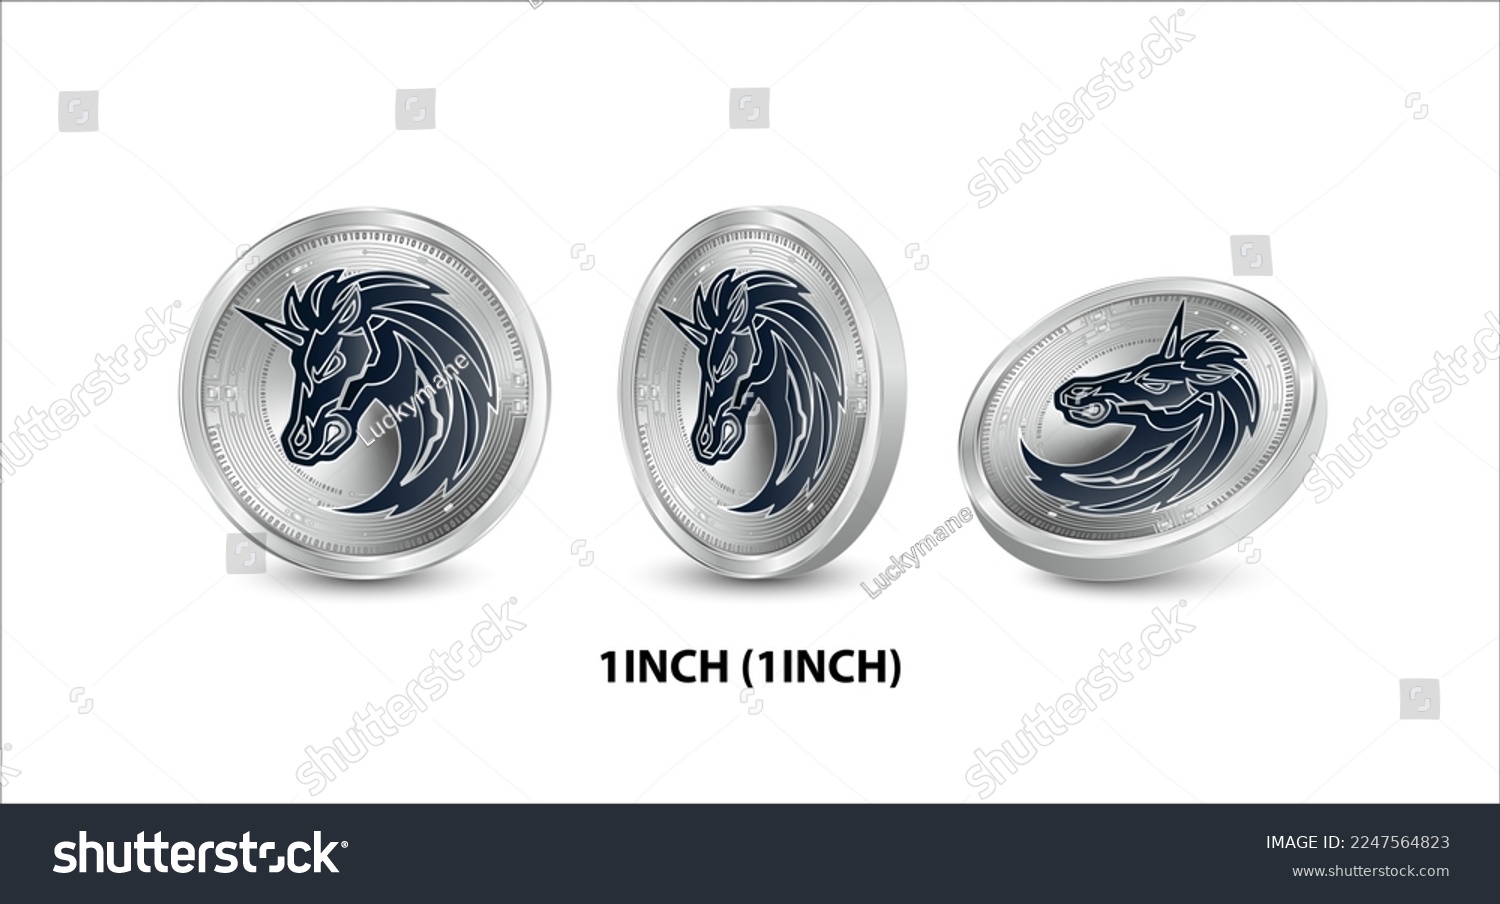 SVG of Set of silver 1inch (1INCH) coin. 3D isometric Physical coins. Digital currency. Cryptocurrency. Silver coin with bitcoin, ripple, ethereum symbol isolated on white background. Vector illustration. svg